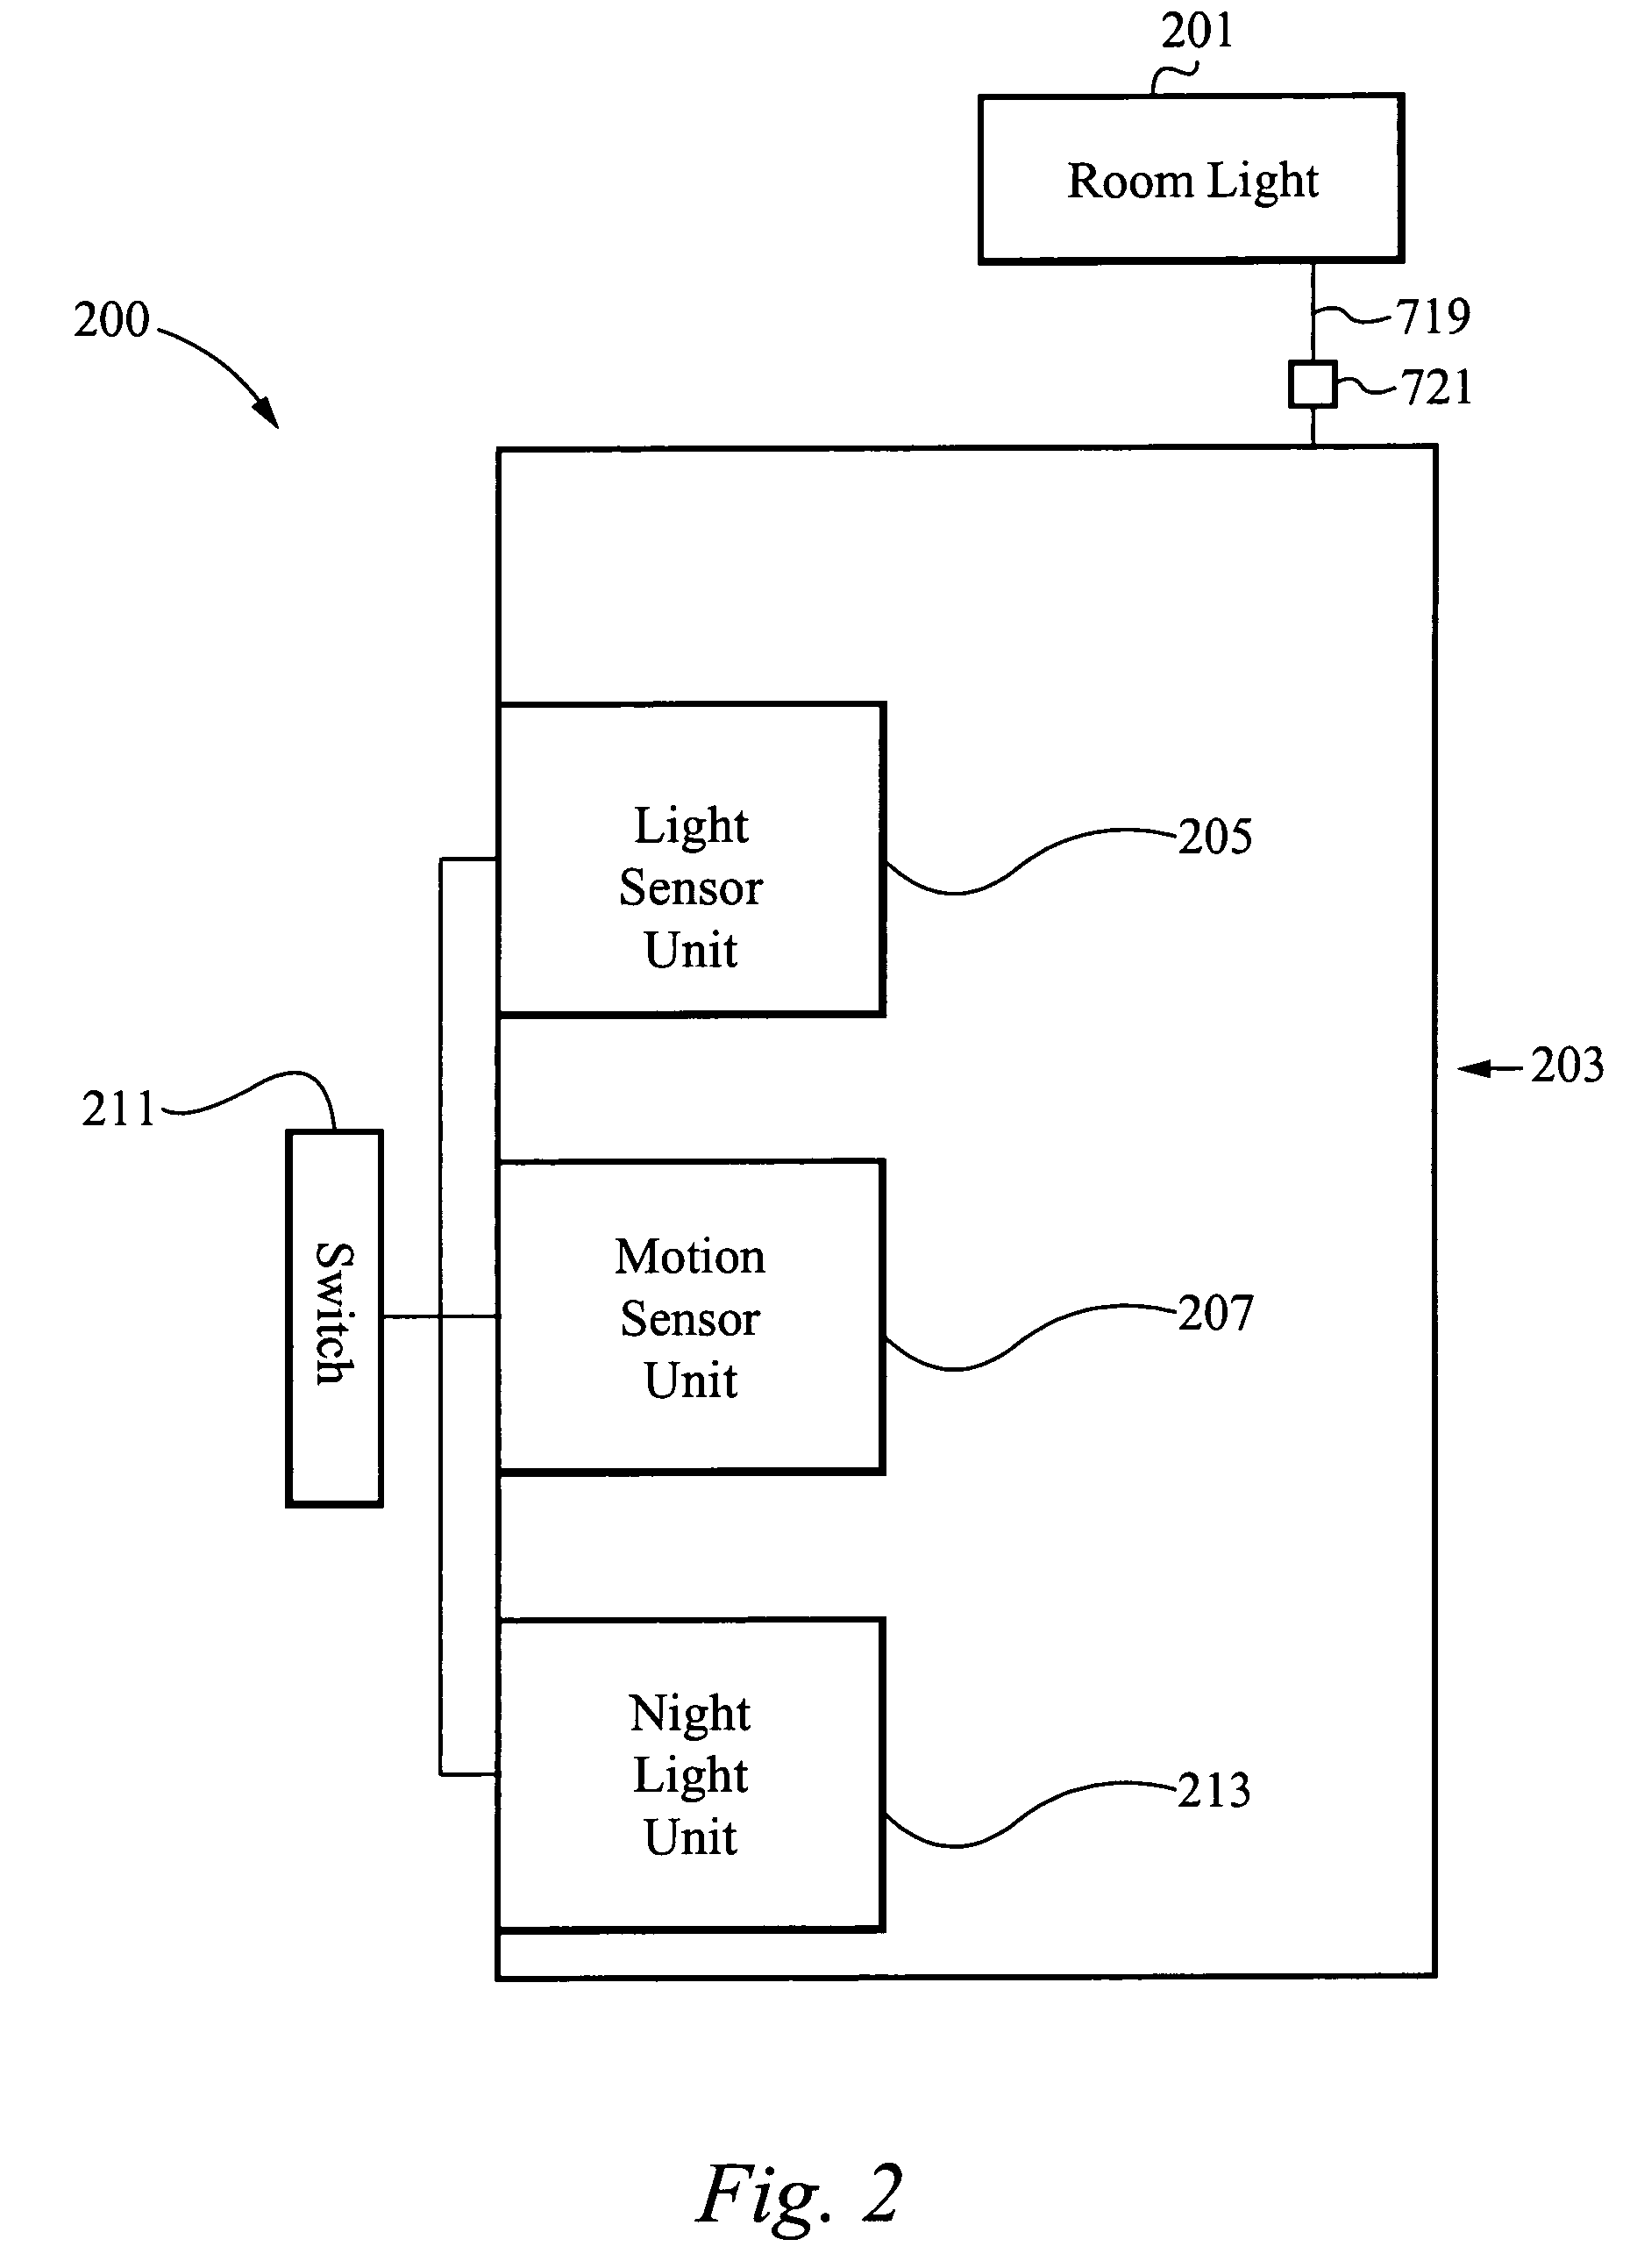 Light management system device and method